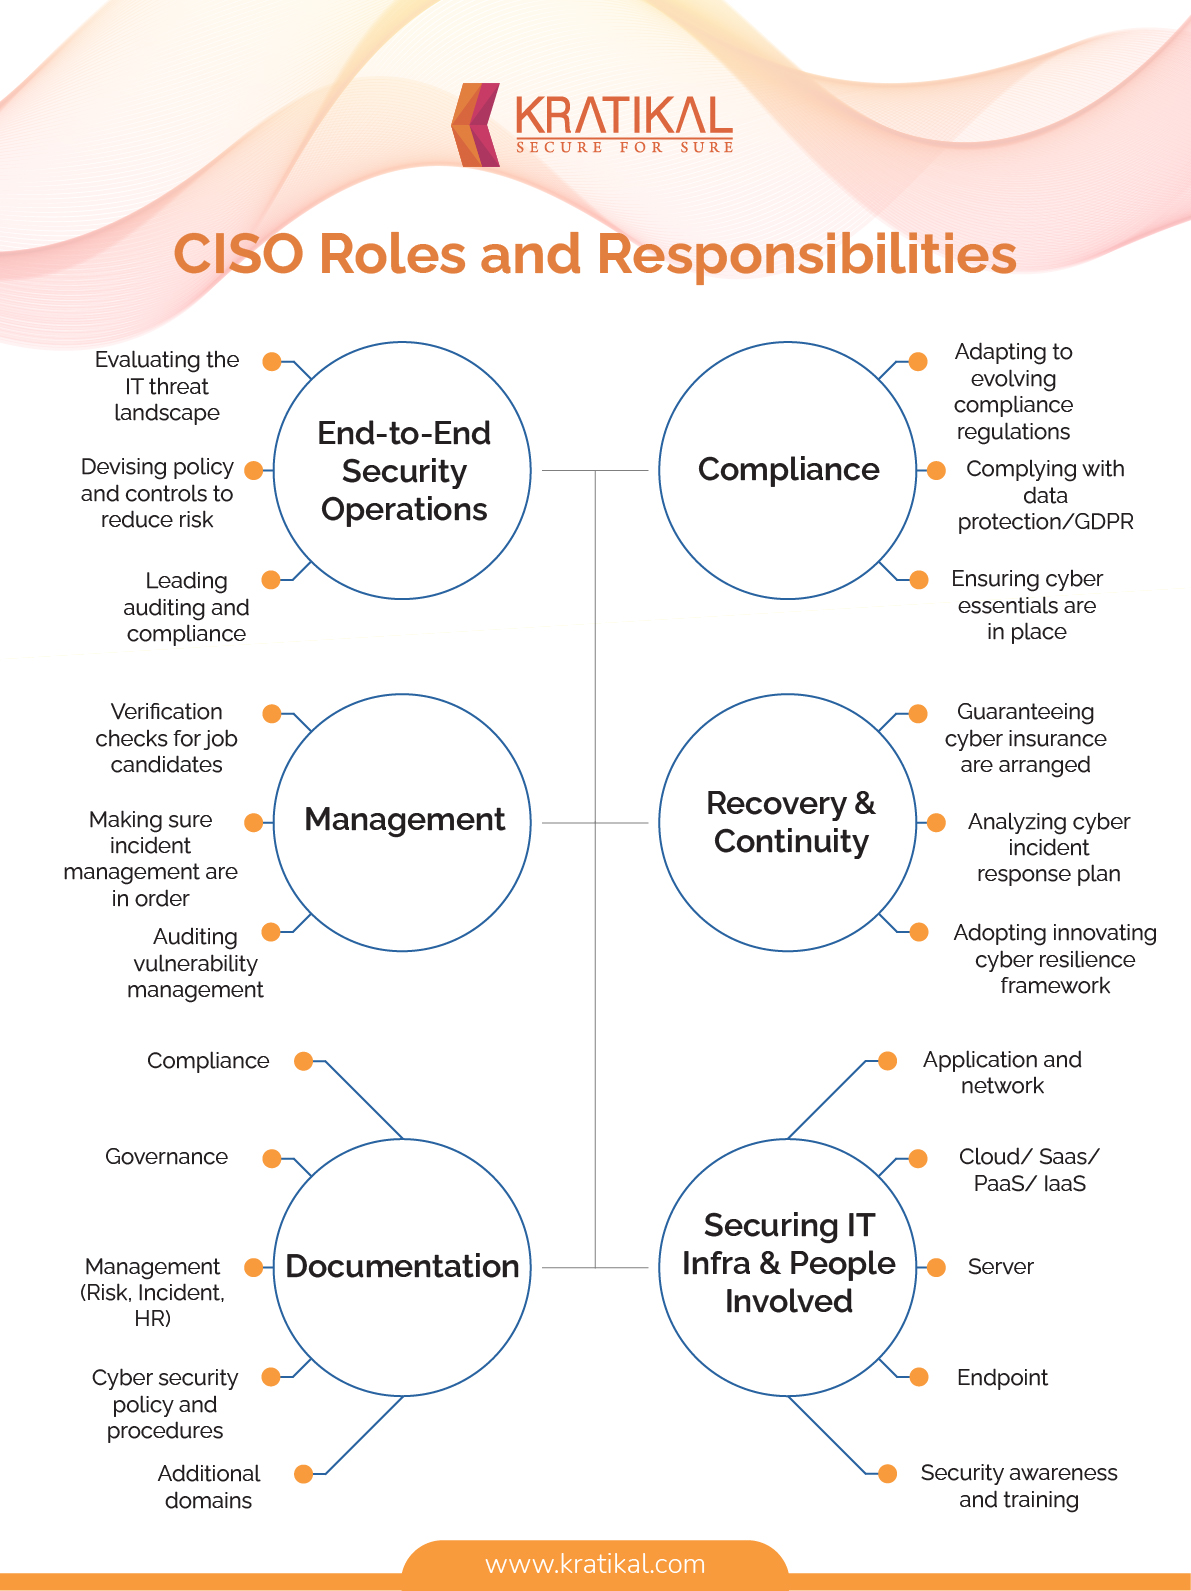 CISO Roles and Responsibilities